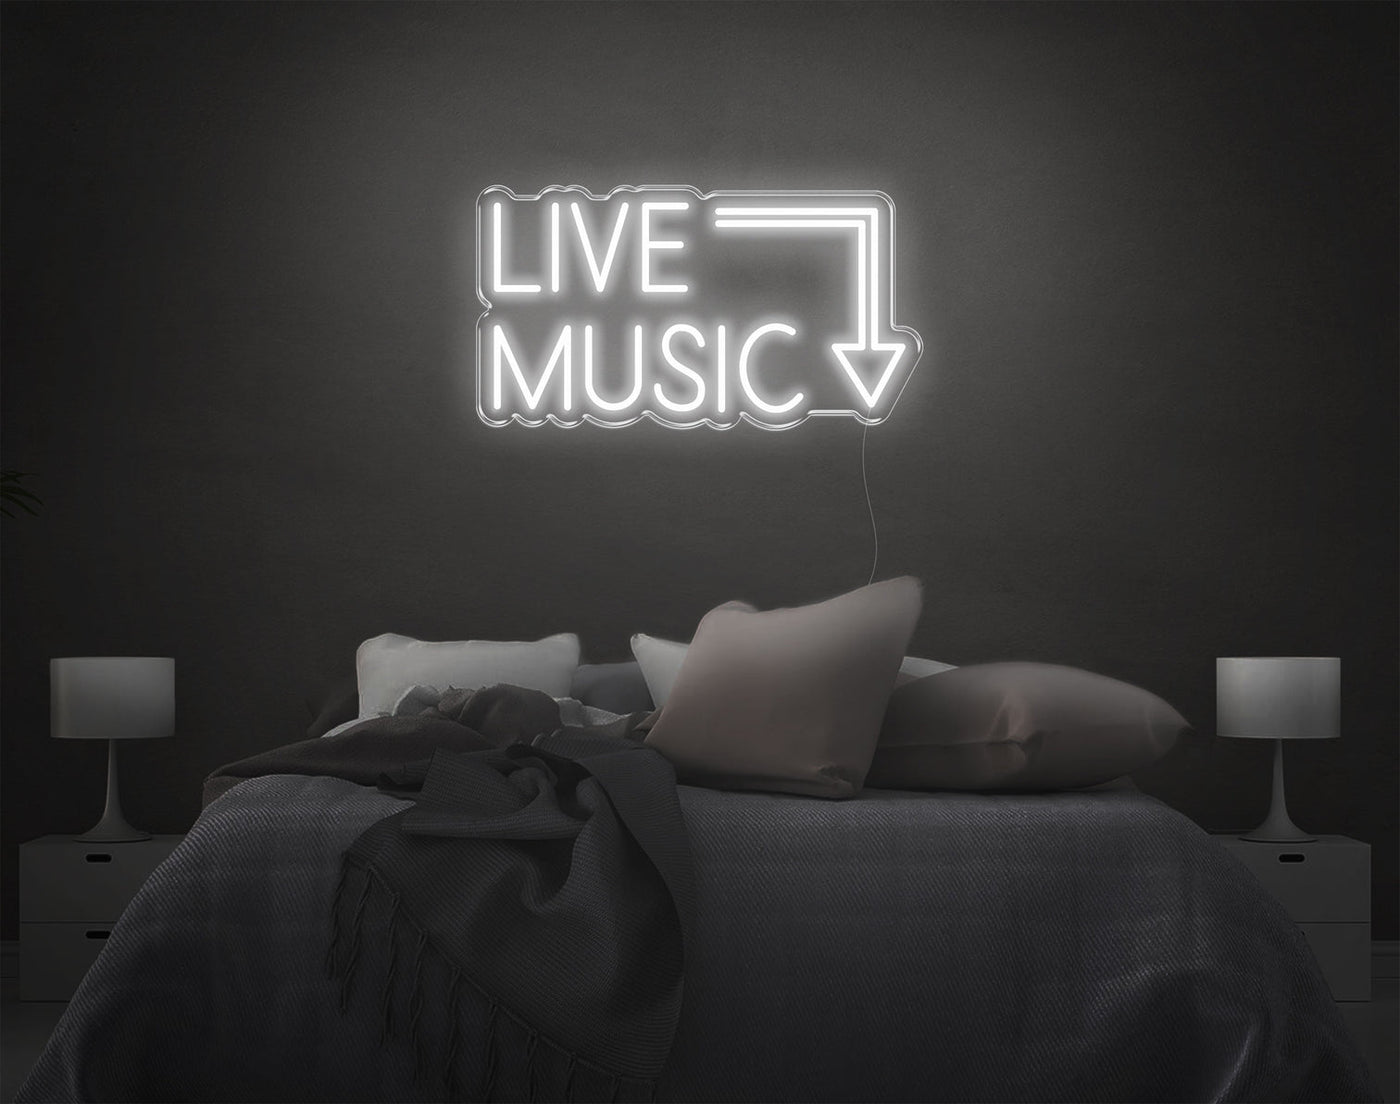 Live Music LED Neon Sign - 11inch x 21inchHot Pink